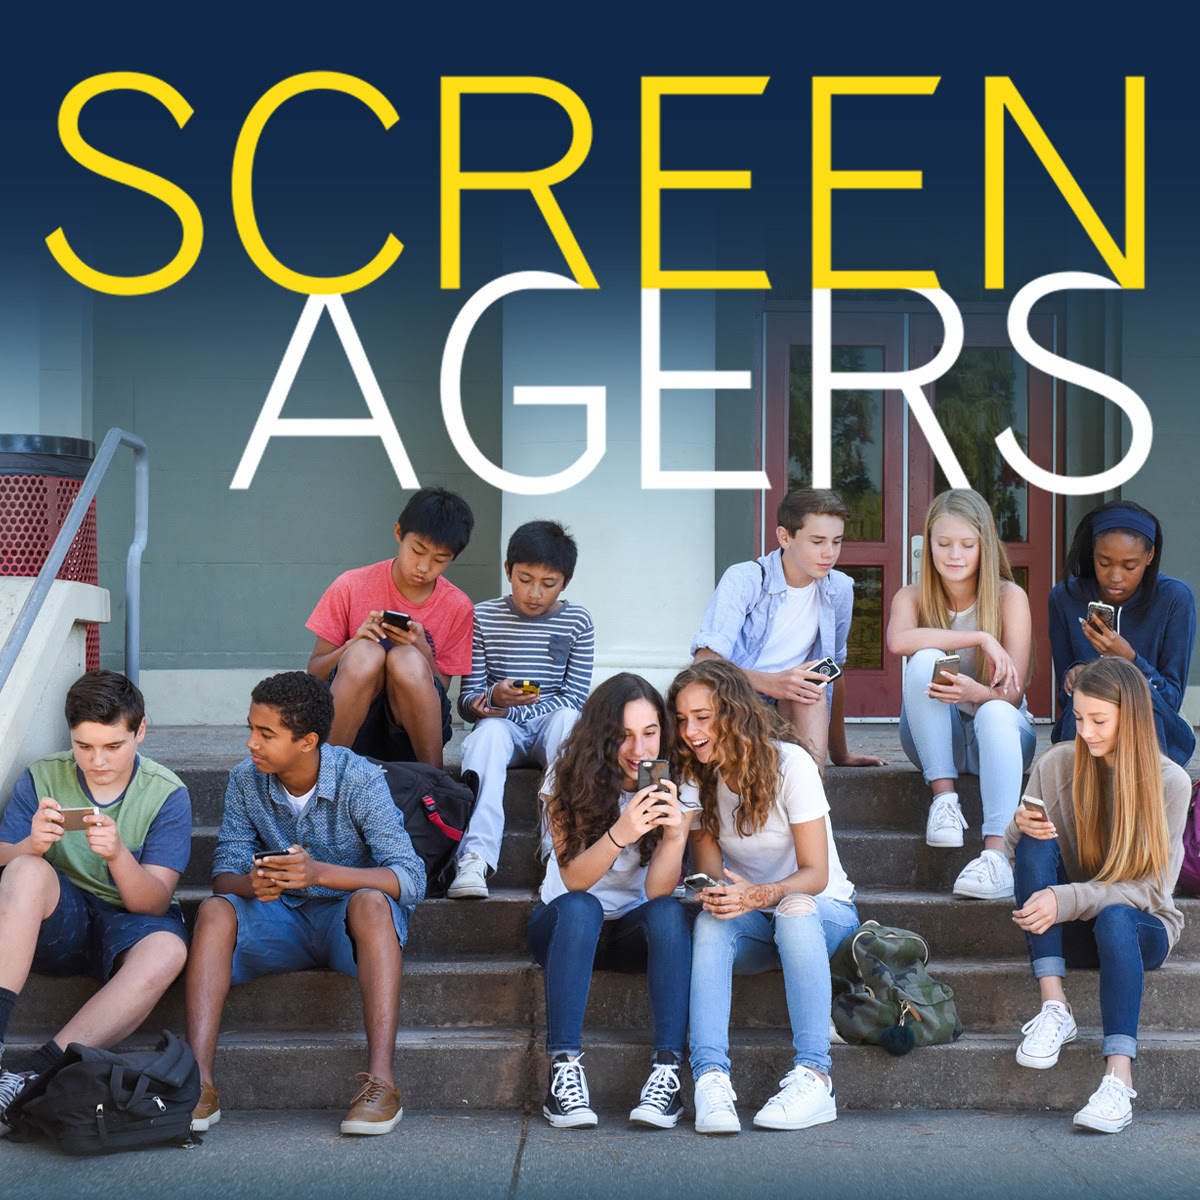 Screenagers Film Presented By Wellness and Education Clinic at Owl Creek